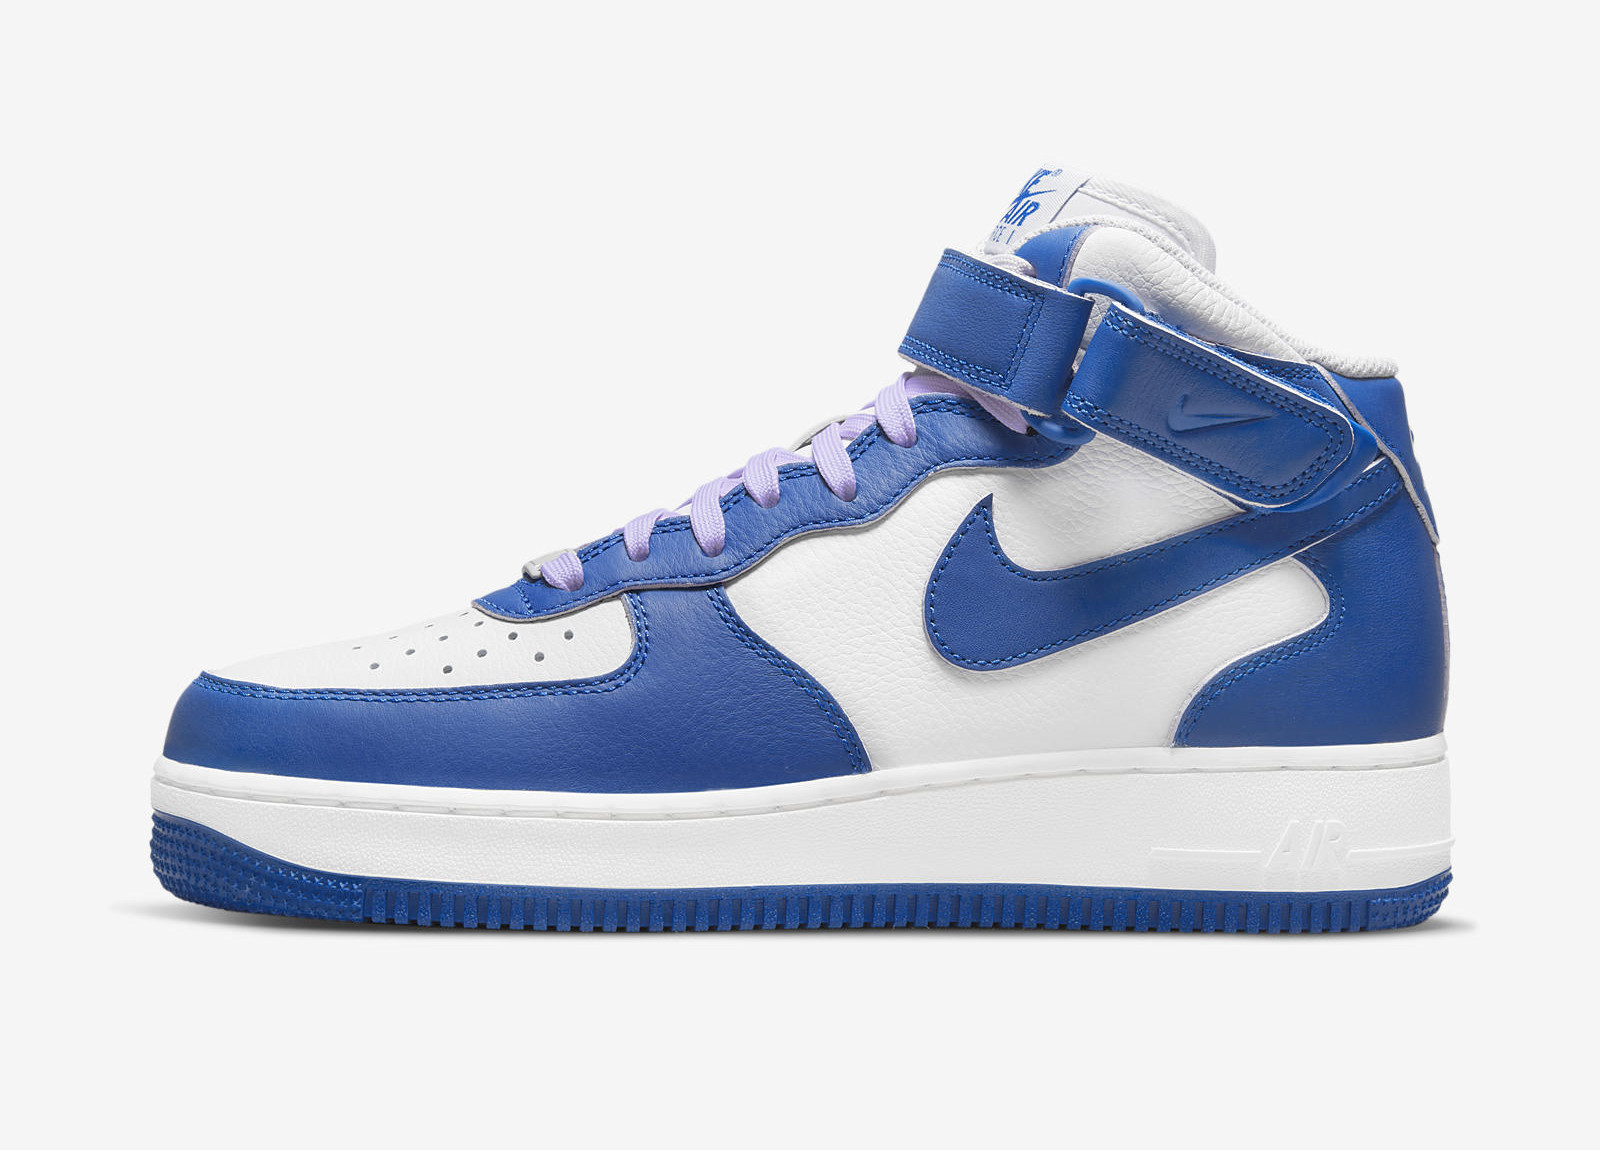 Nike Air Force 1 Mid
« Military Blue »